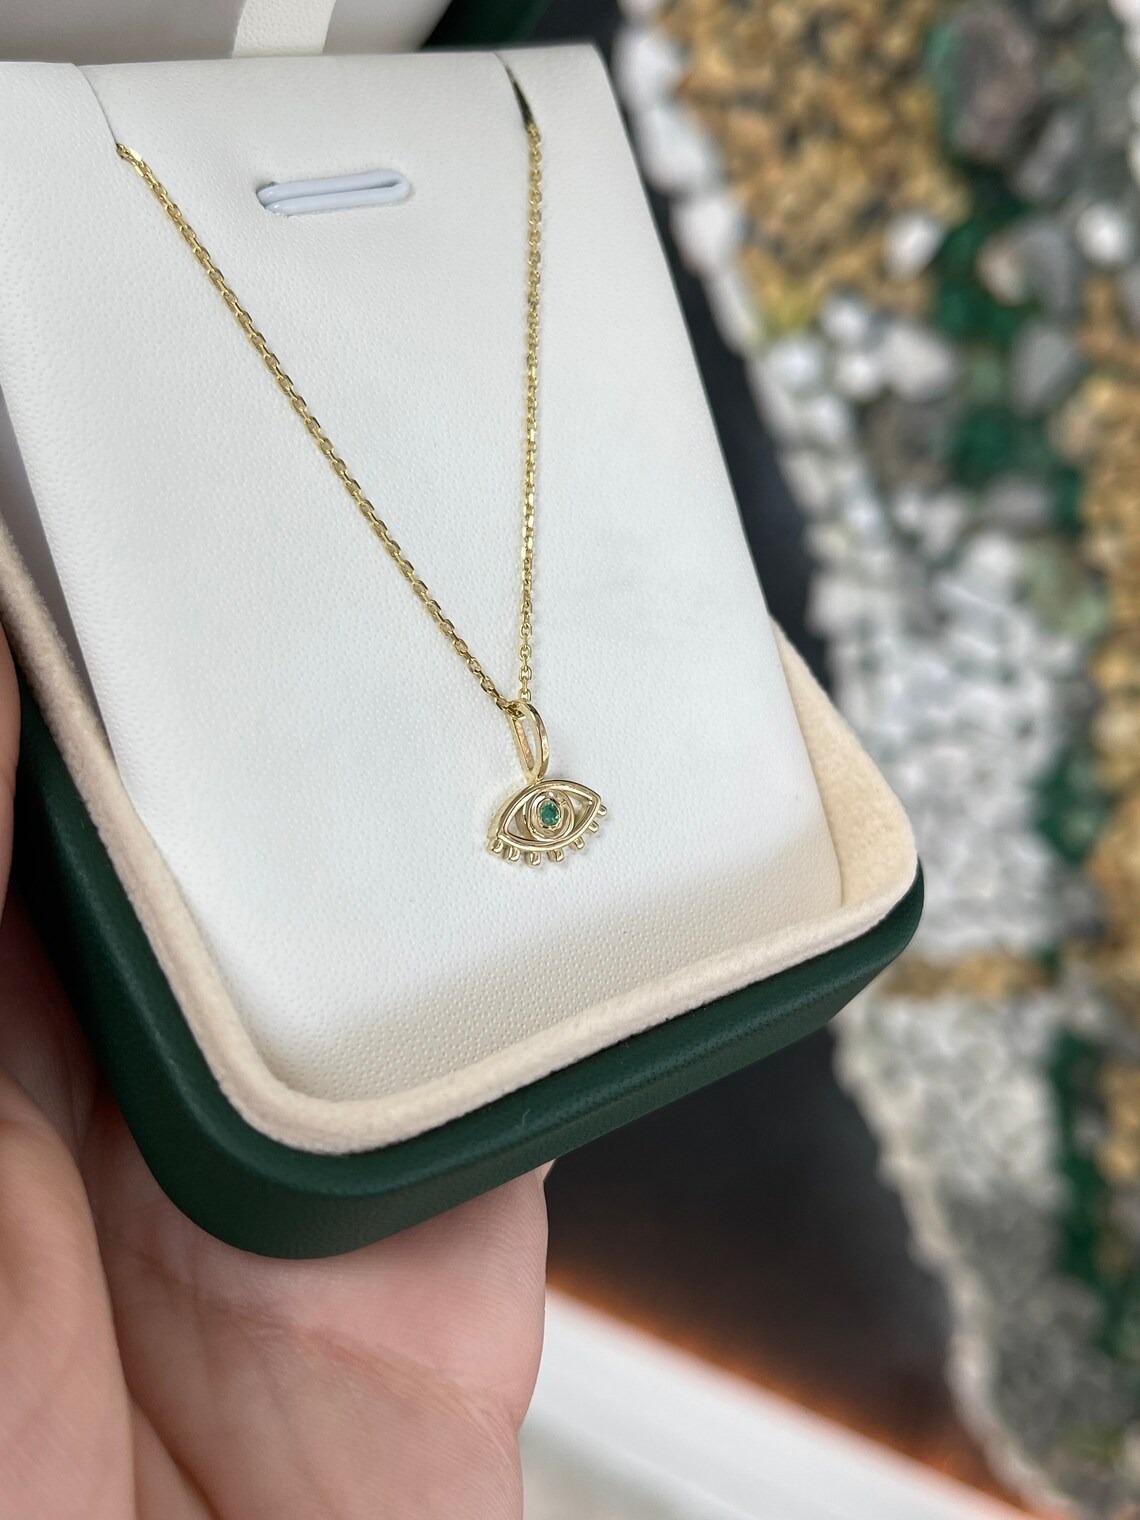 Round Cut Zambian Emerald Bezel Set Evil Eye Real 14K Gold Pendant Necklace In New Condition For Sale In Jupiter, FL